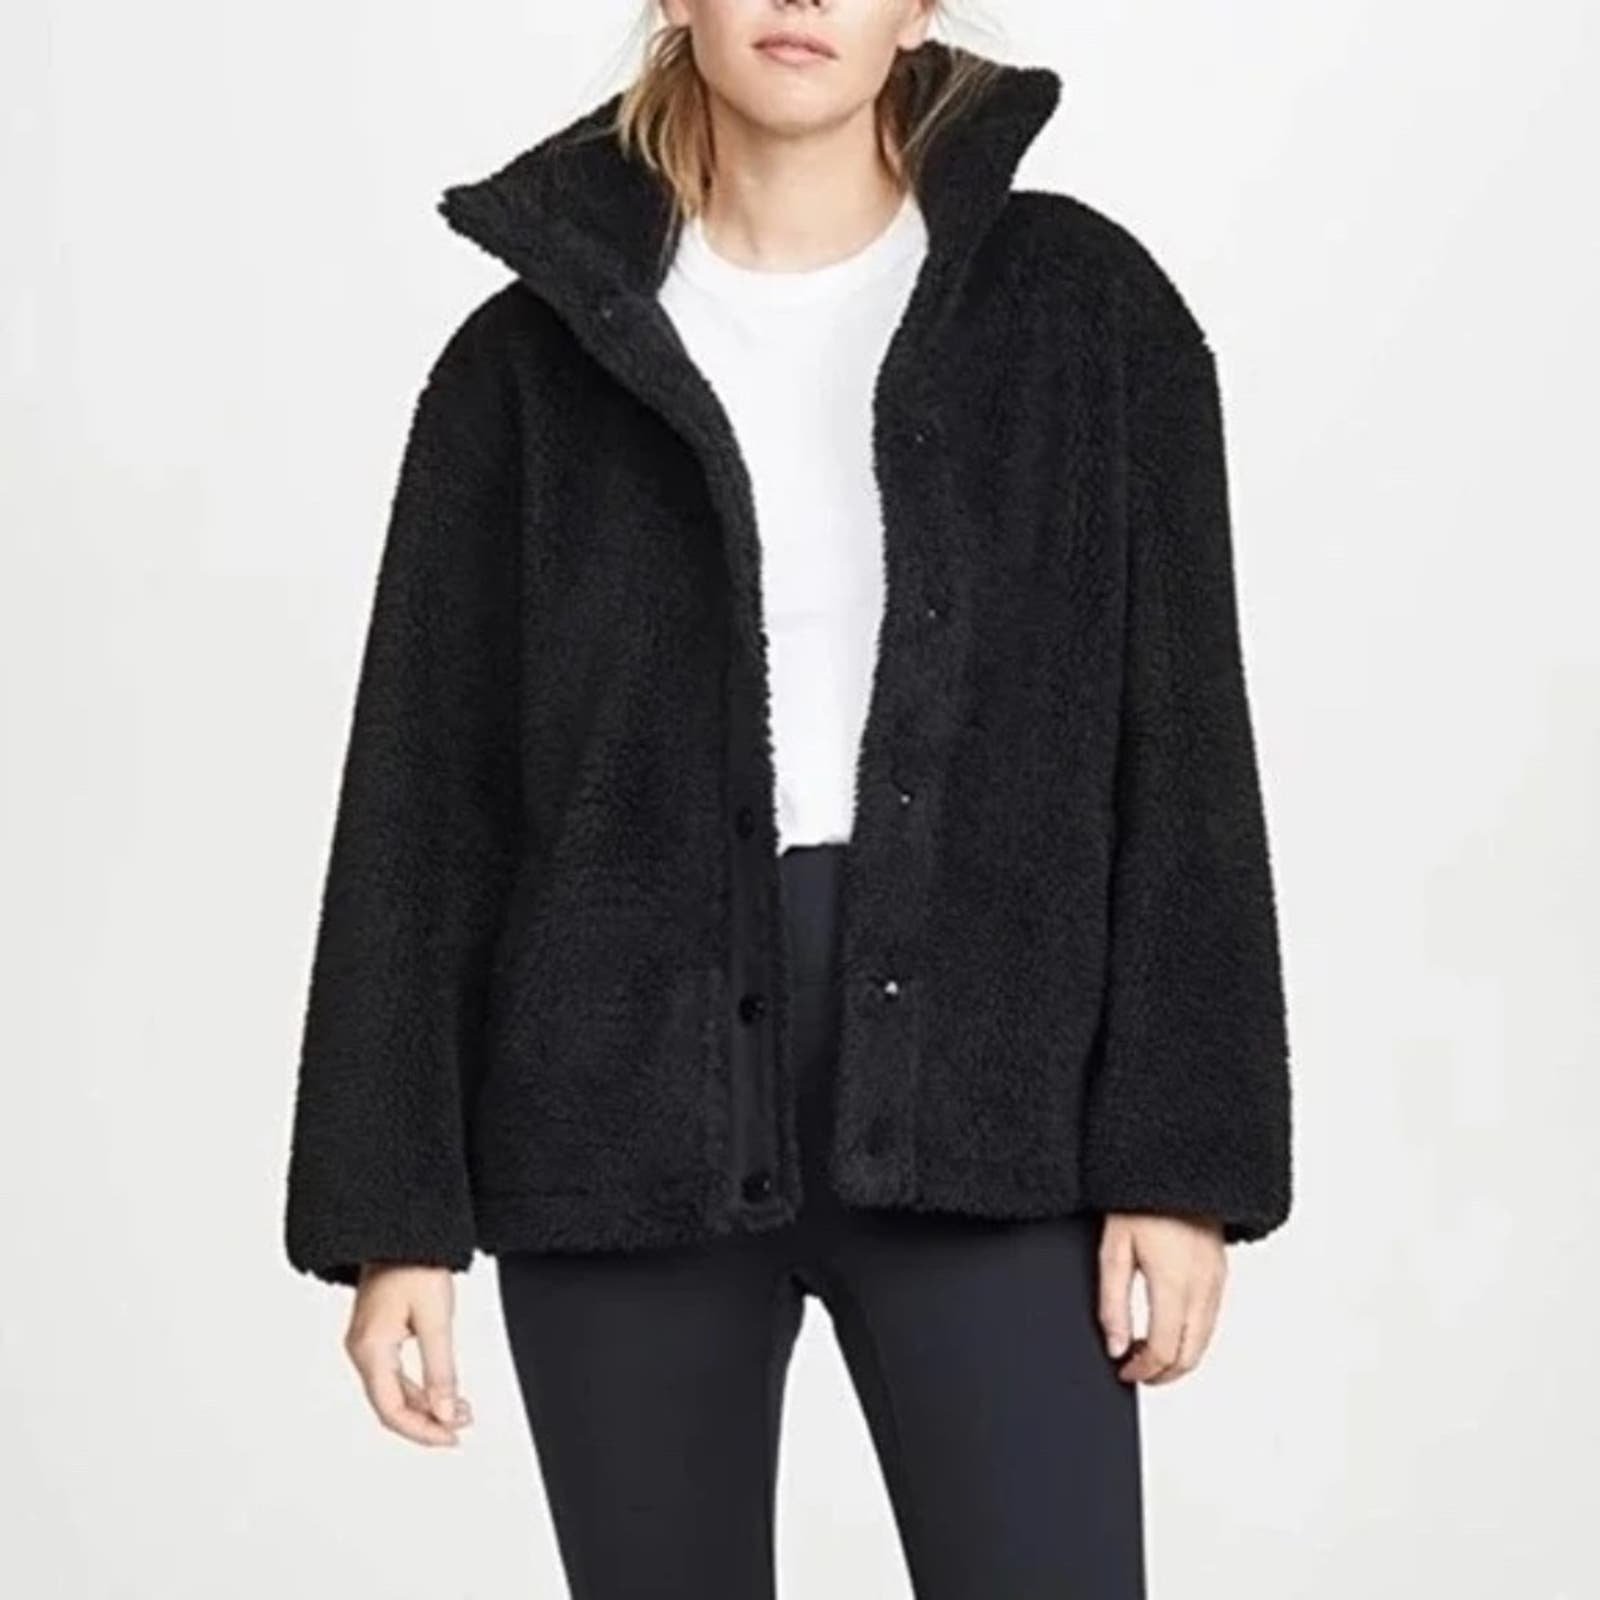 save up to 70% VARLEY Clemson Teddy Jacket Black Sherpa Snap Buttons MIuDvsWqd outlet online shop